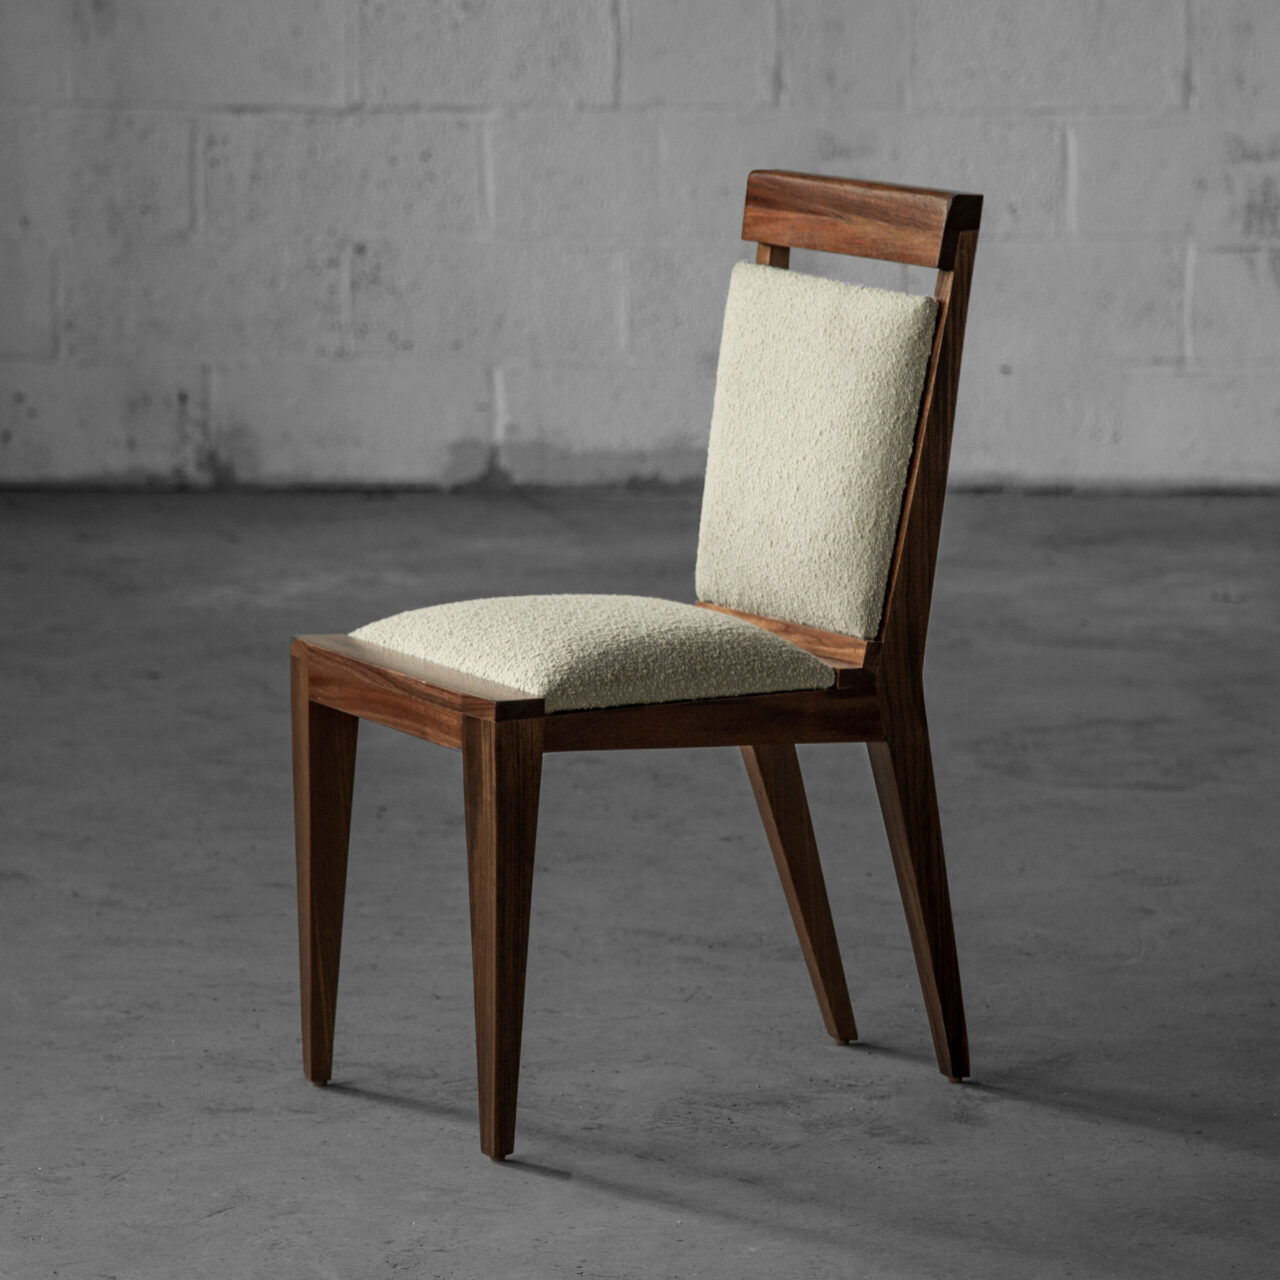 A minimalist wooden chair called Angles Chair with a light speckled cushion on the seat and backrest, set against a bare concrete background. This piece, by SENTIENT Furniture, blends modern design with a touch of comfort.